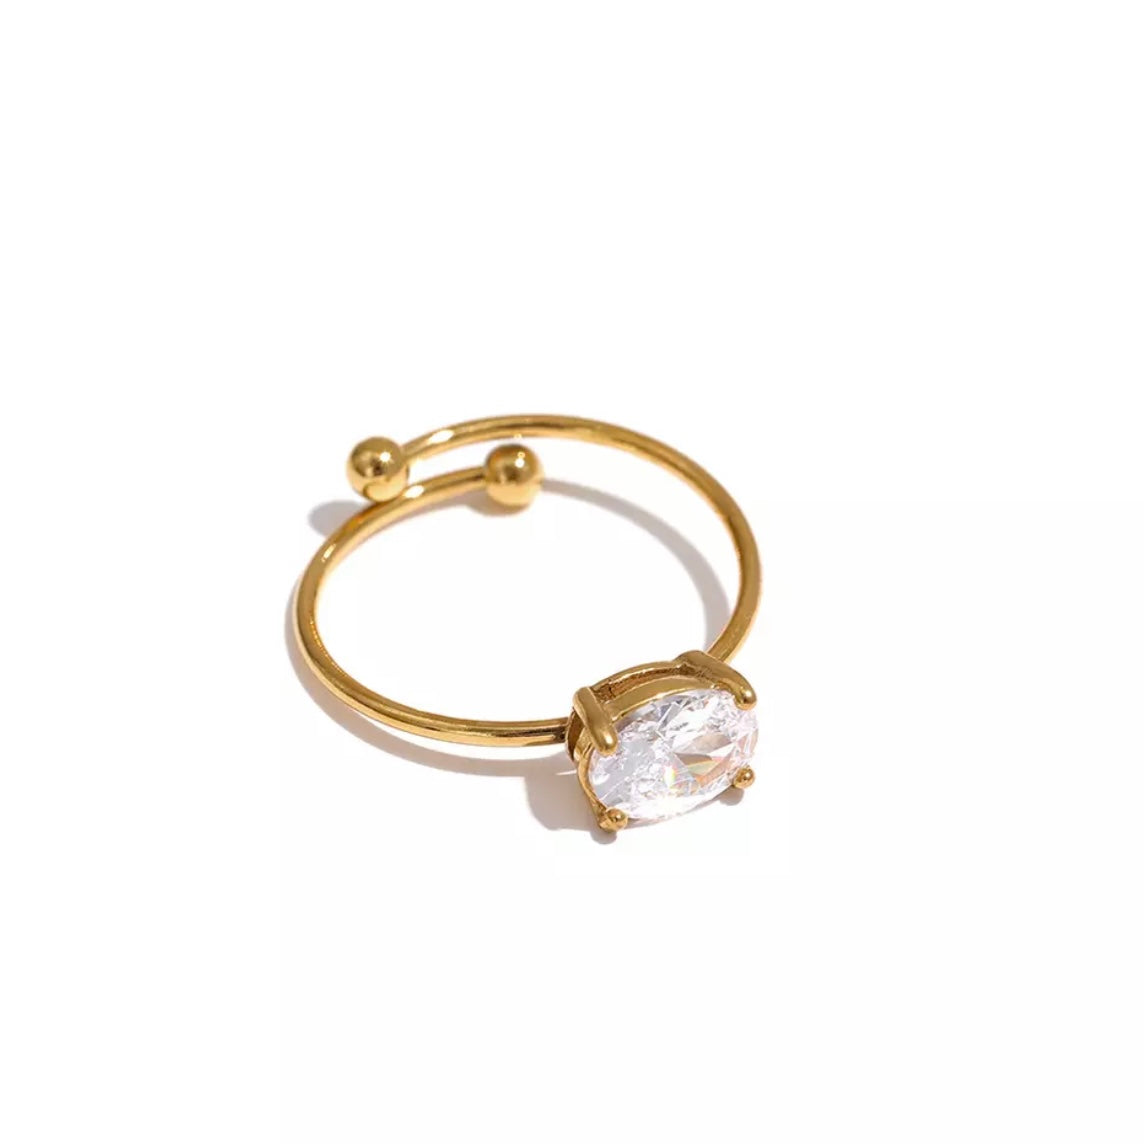 Minimalist thin gold ring band with a delicate and dainty design, perfect for adding a touch of elegance to your everyday look